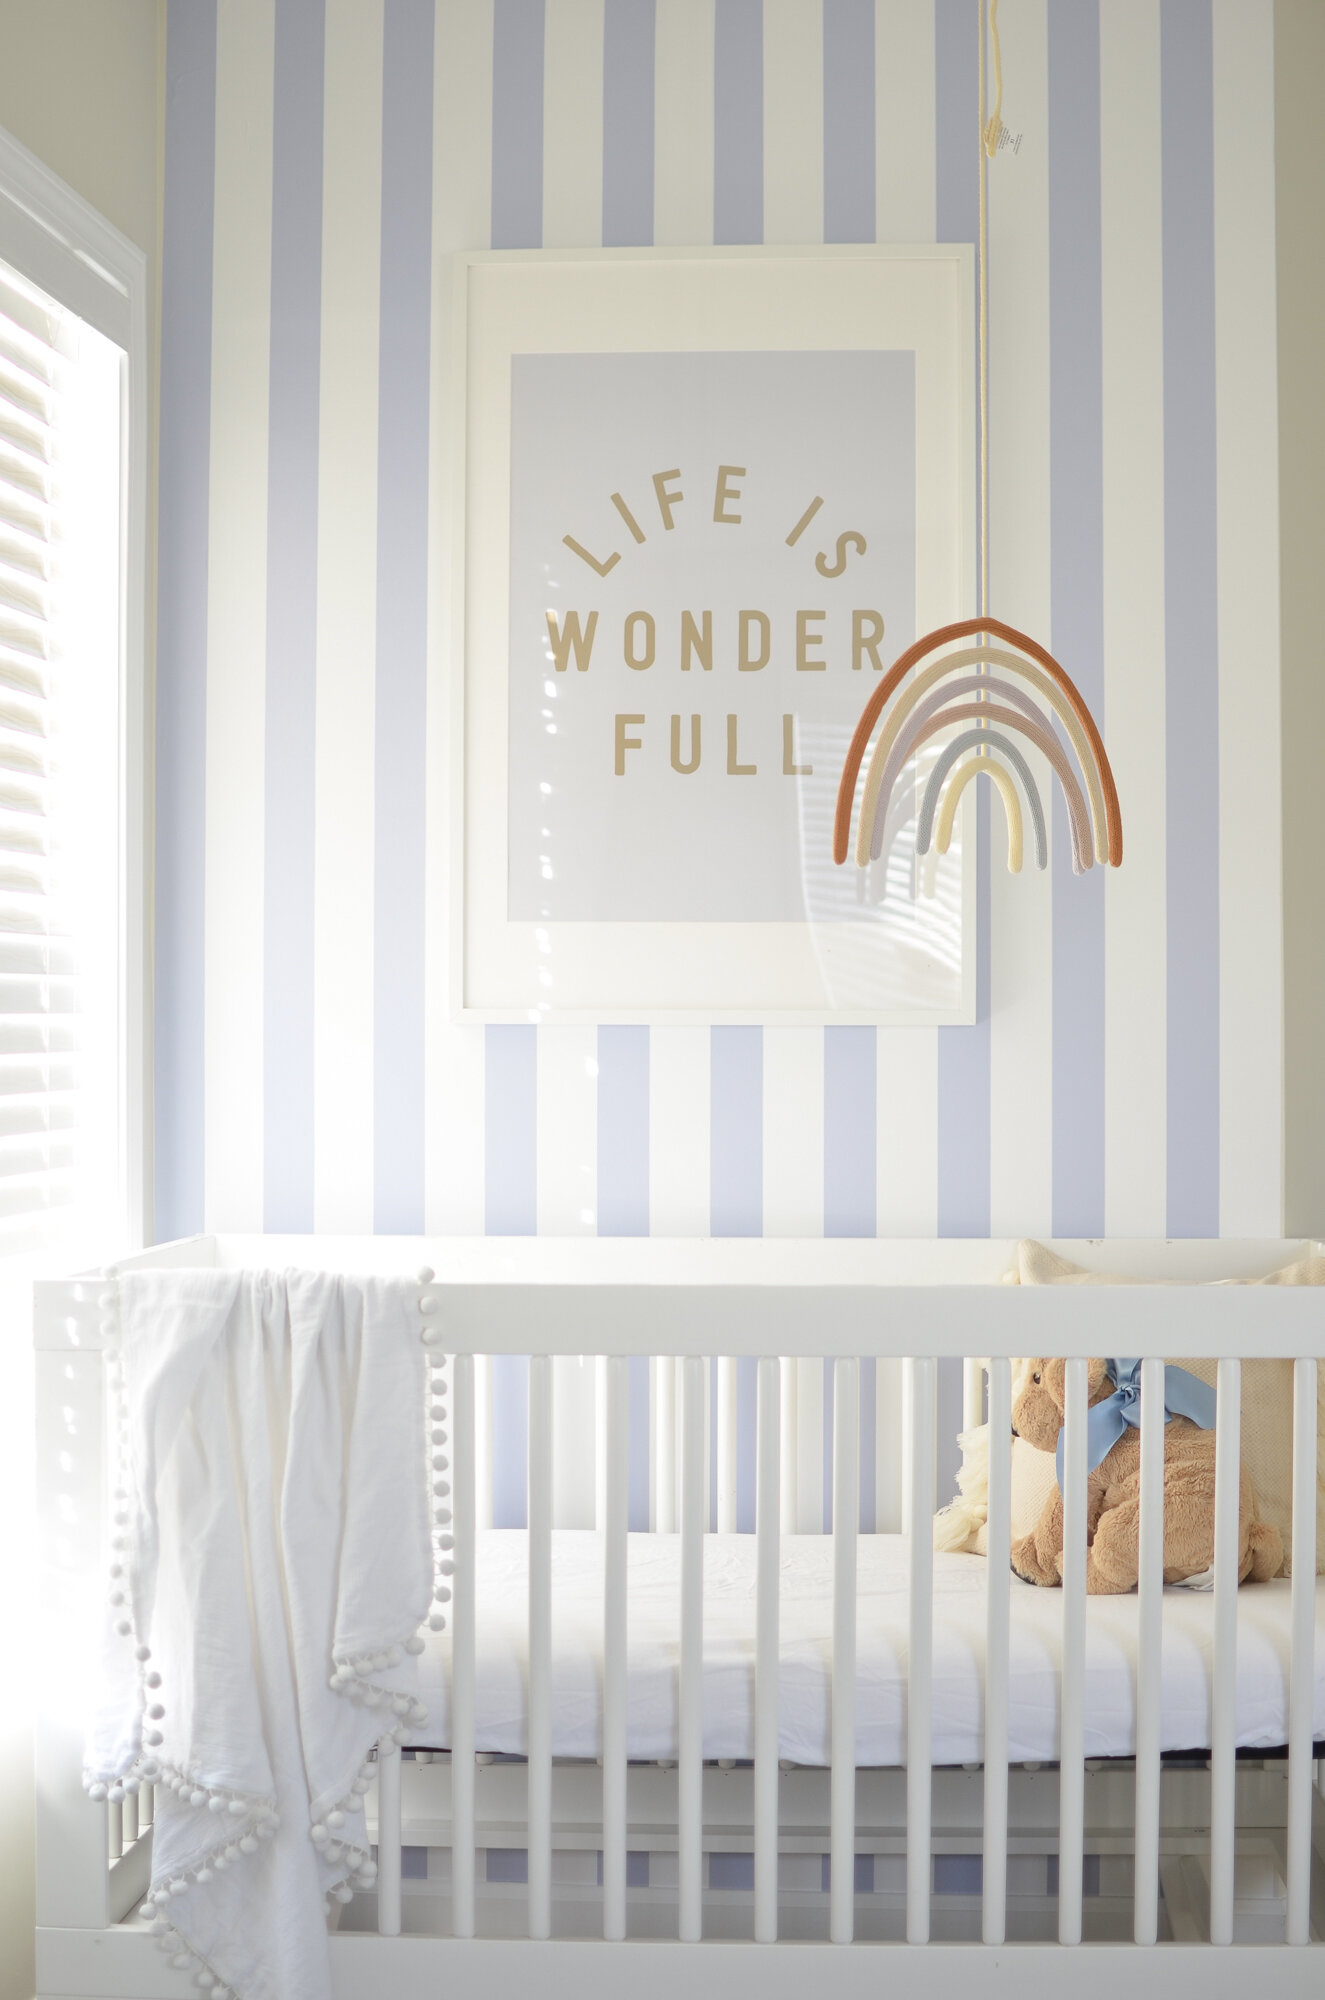 nursery and guest room combined